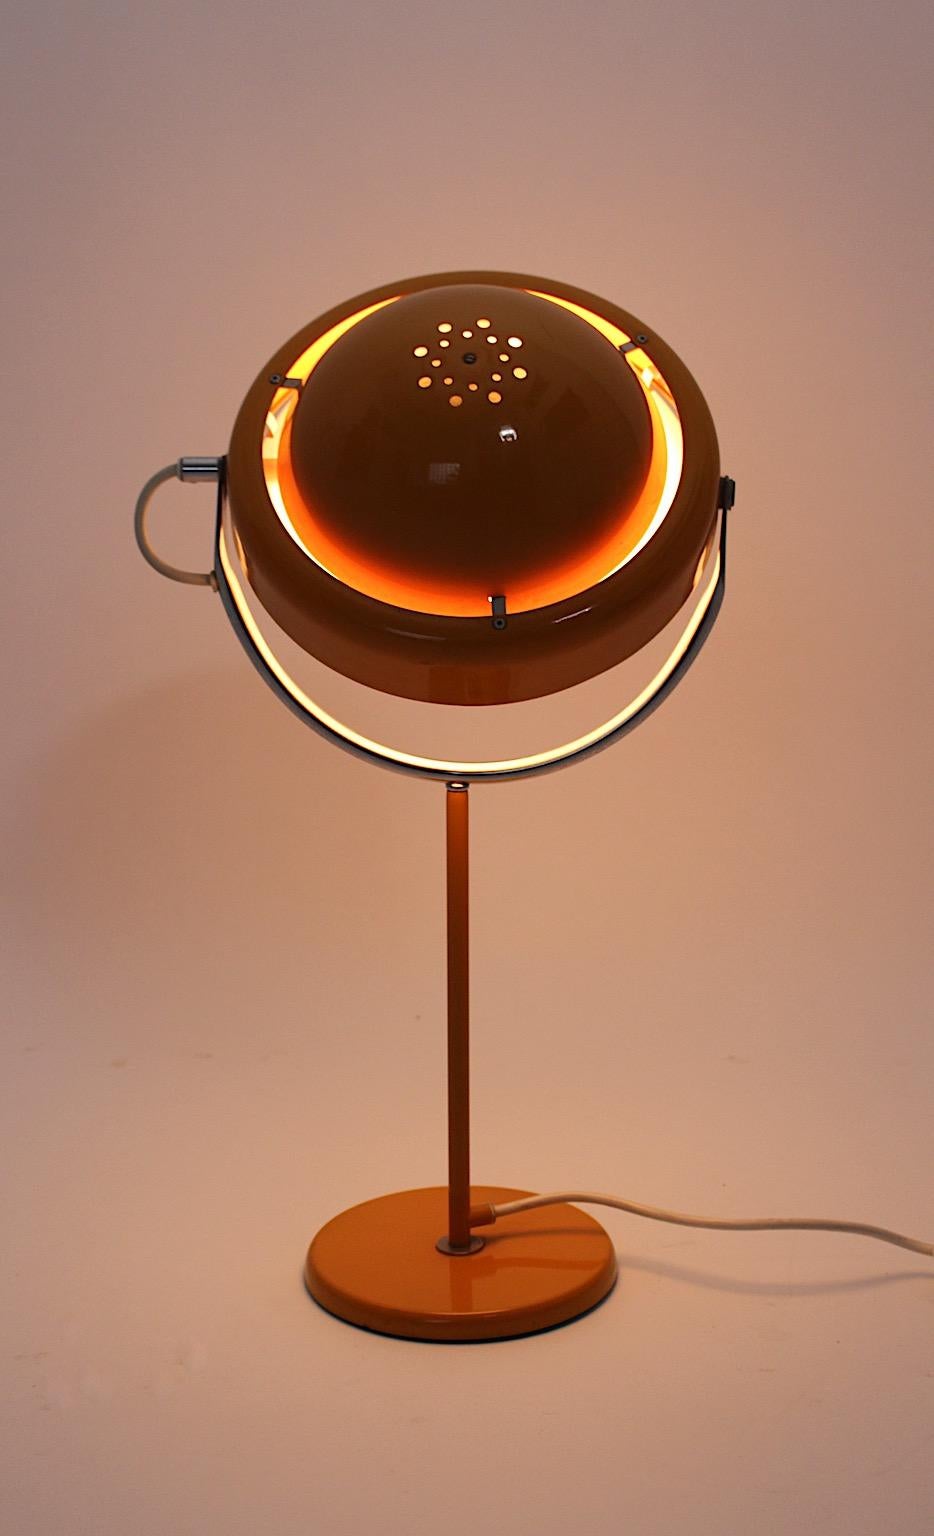 Space Age Vintage Yellow or Orange Table Lamp Uno Dahlen, 1960s, Sweden For Sale 3